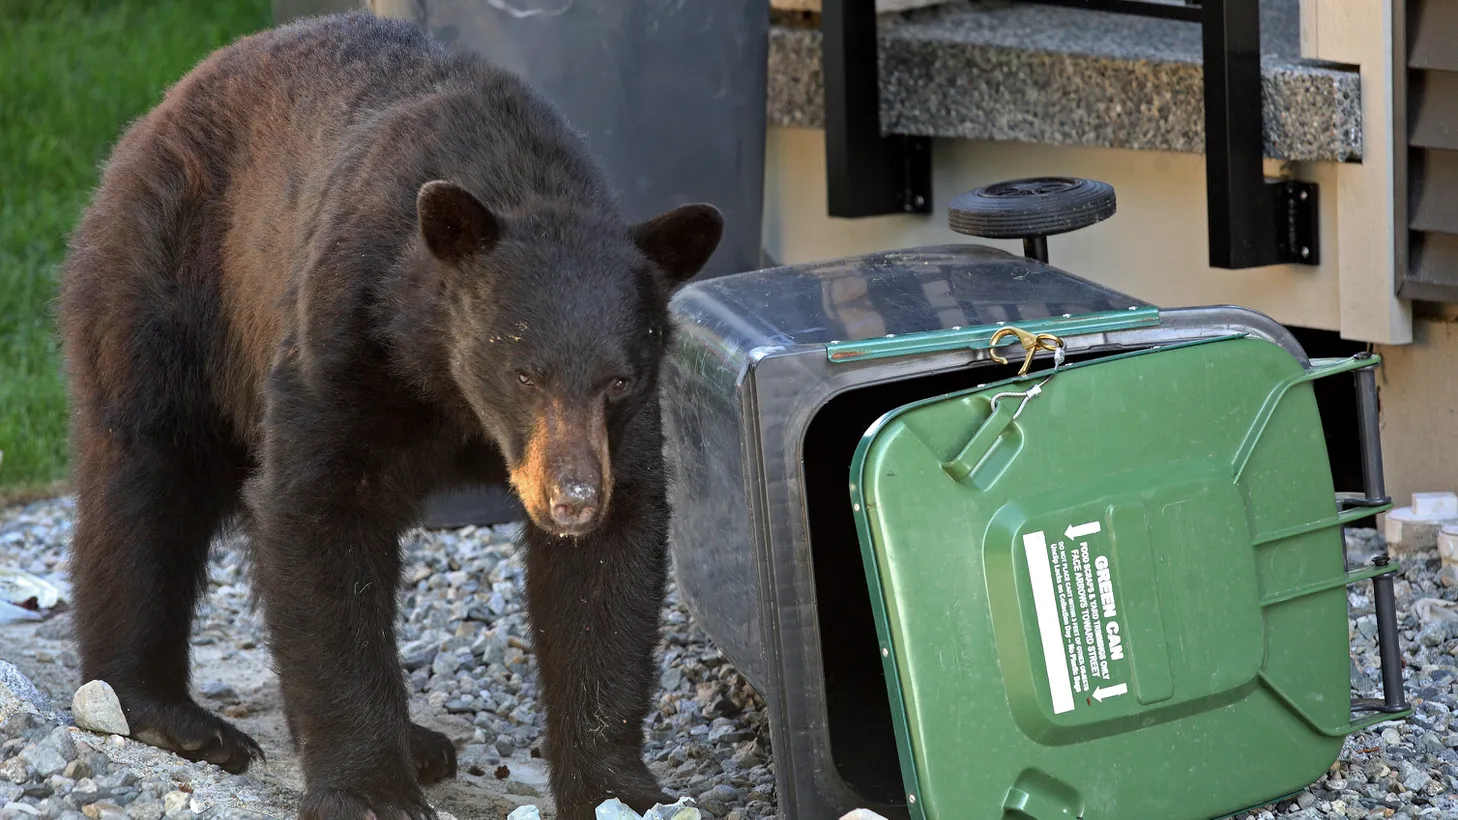 Encounters with black bears are on the rise in Sierra Madre, and while they are rarely aggressive, residents say they’re getting bolder about entering homes and yards.